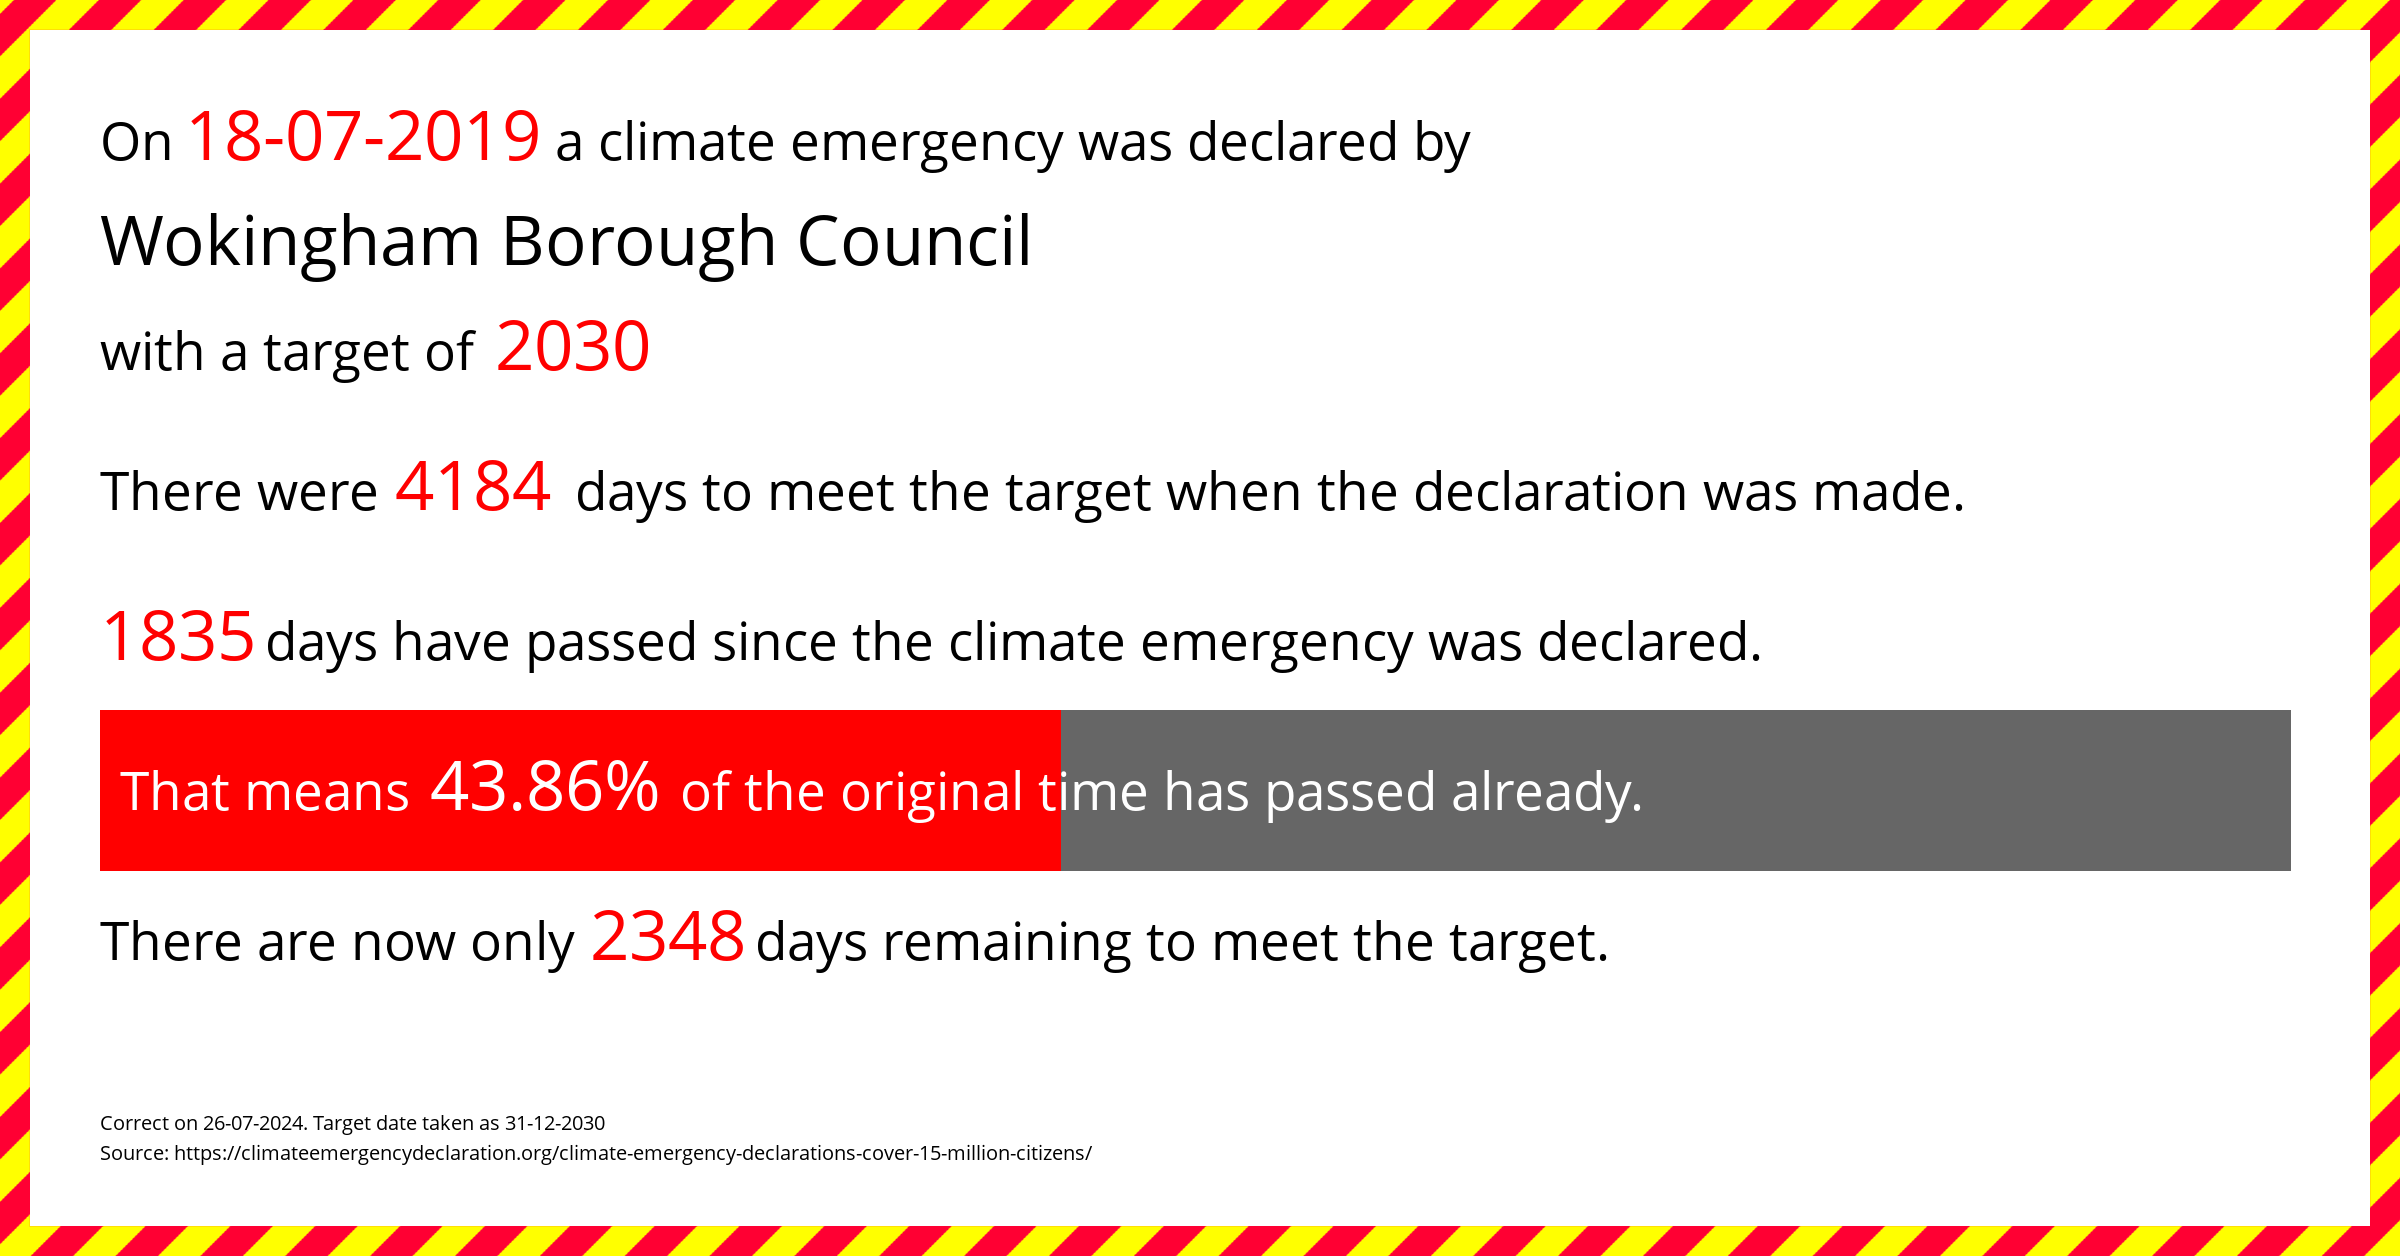 Wokingham Borough Council declared a Climate emergency on Thursday 18th July 2019, with a target of 2030.